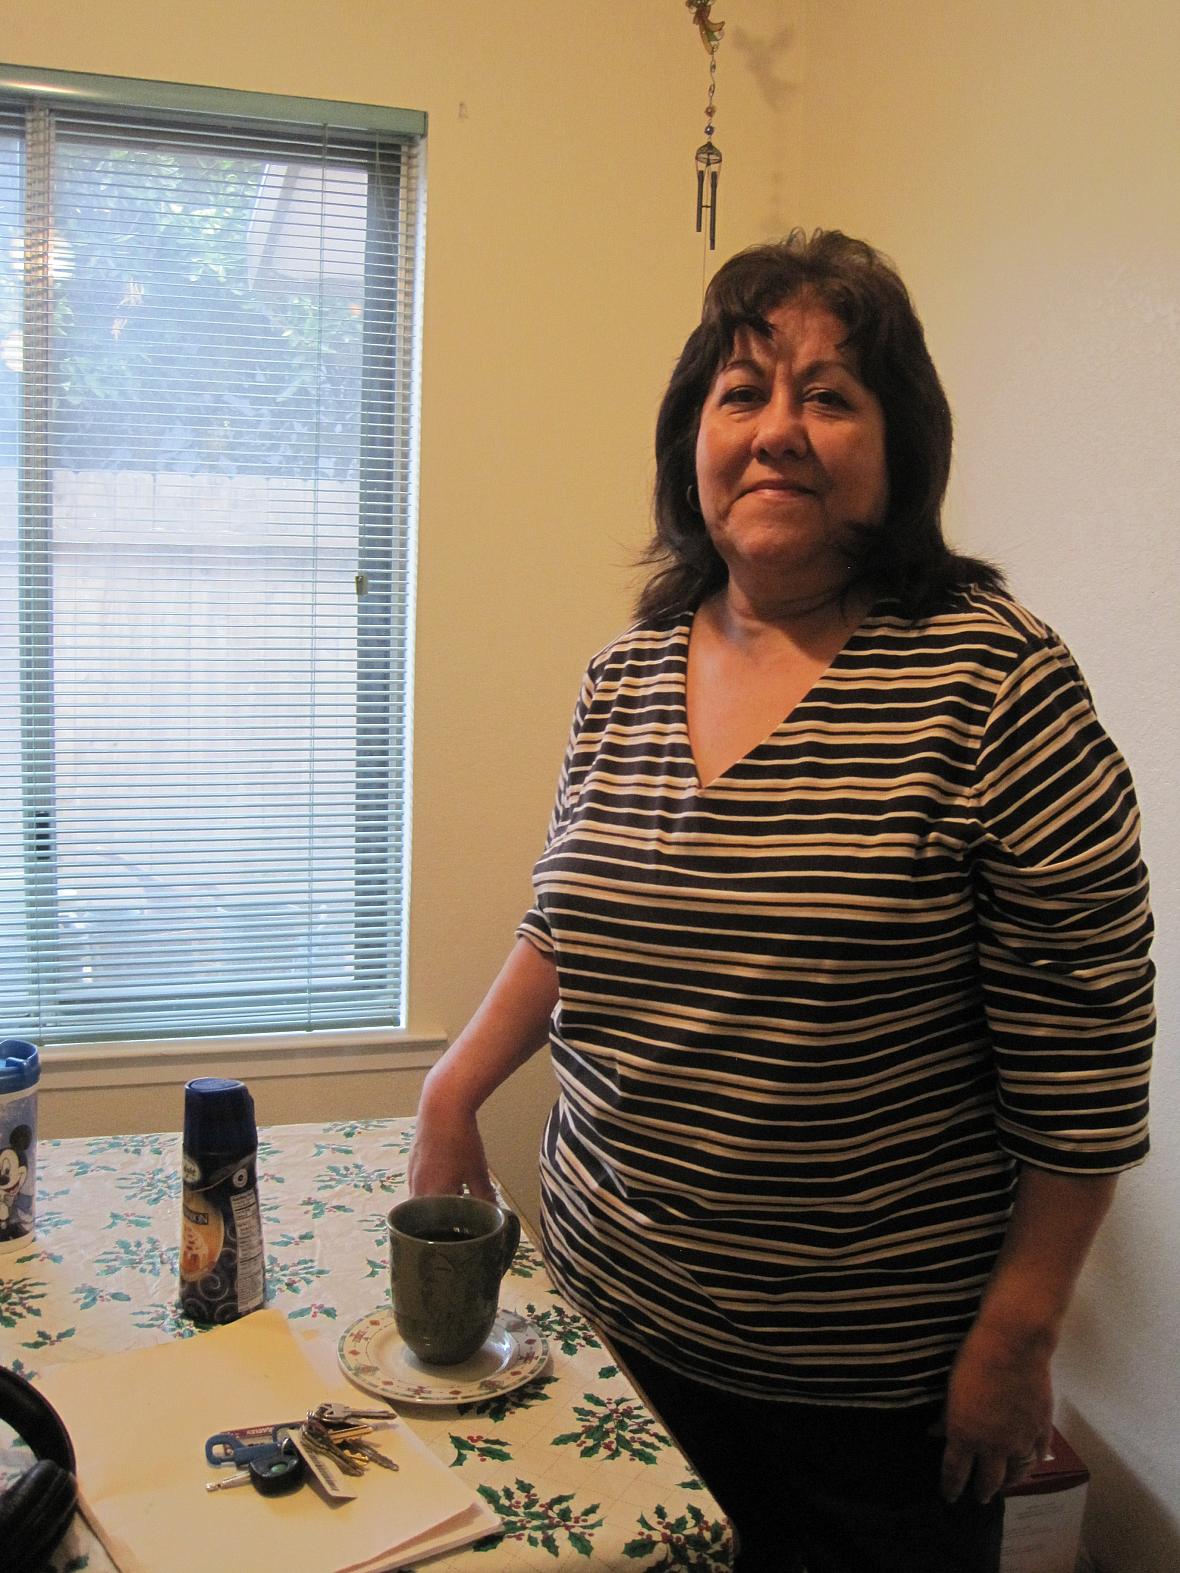 Poorest county in California leaves uninsured in limbo